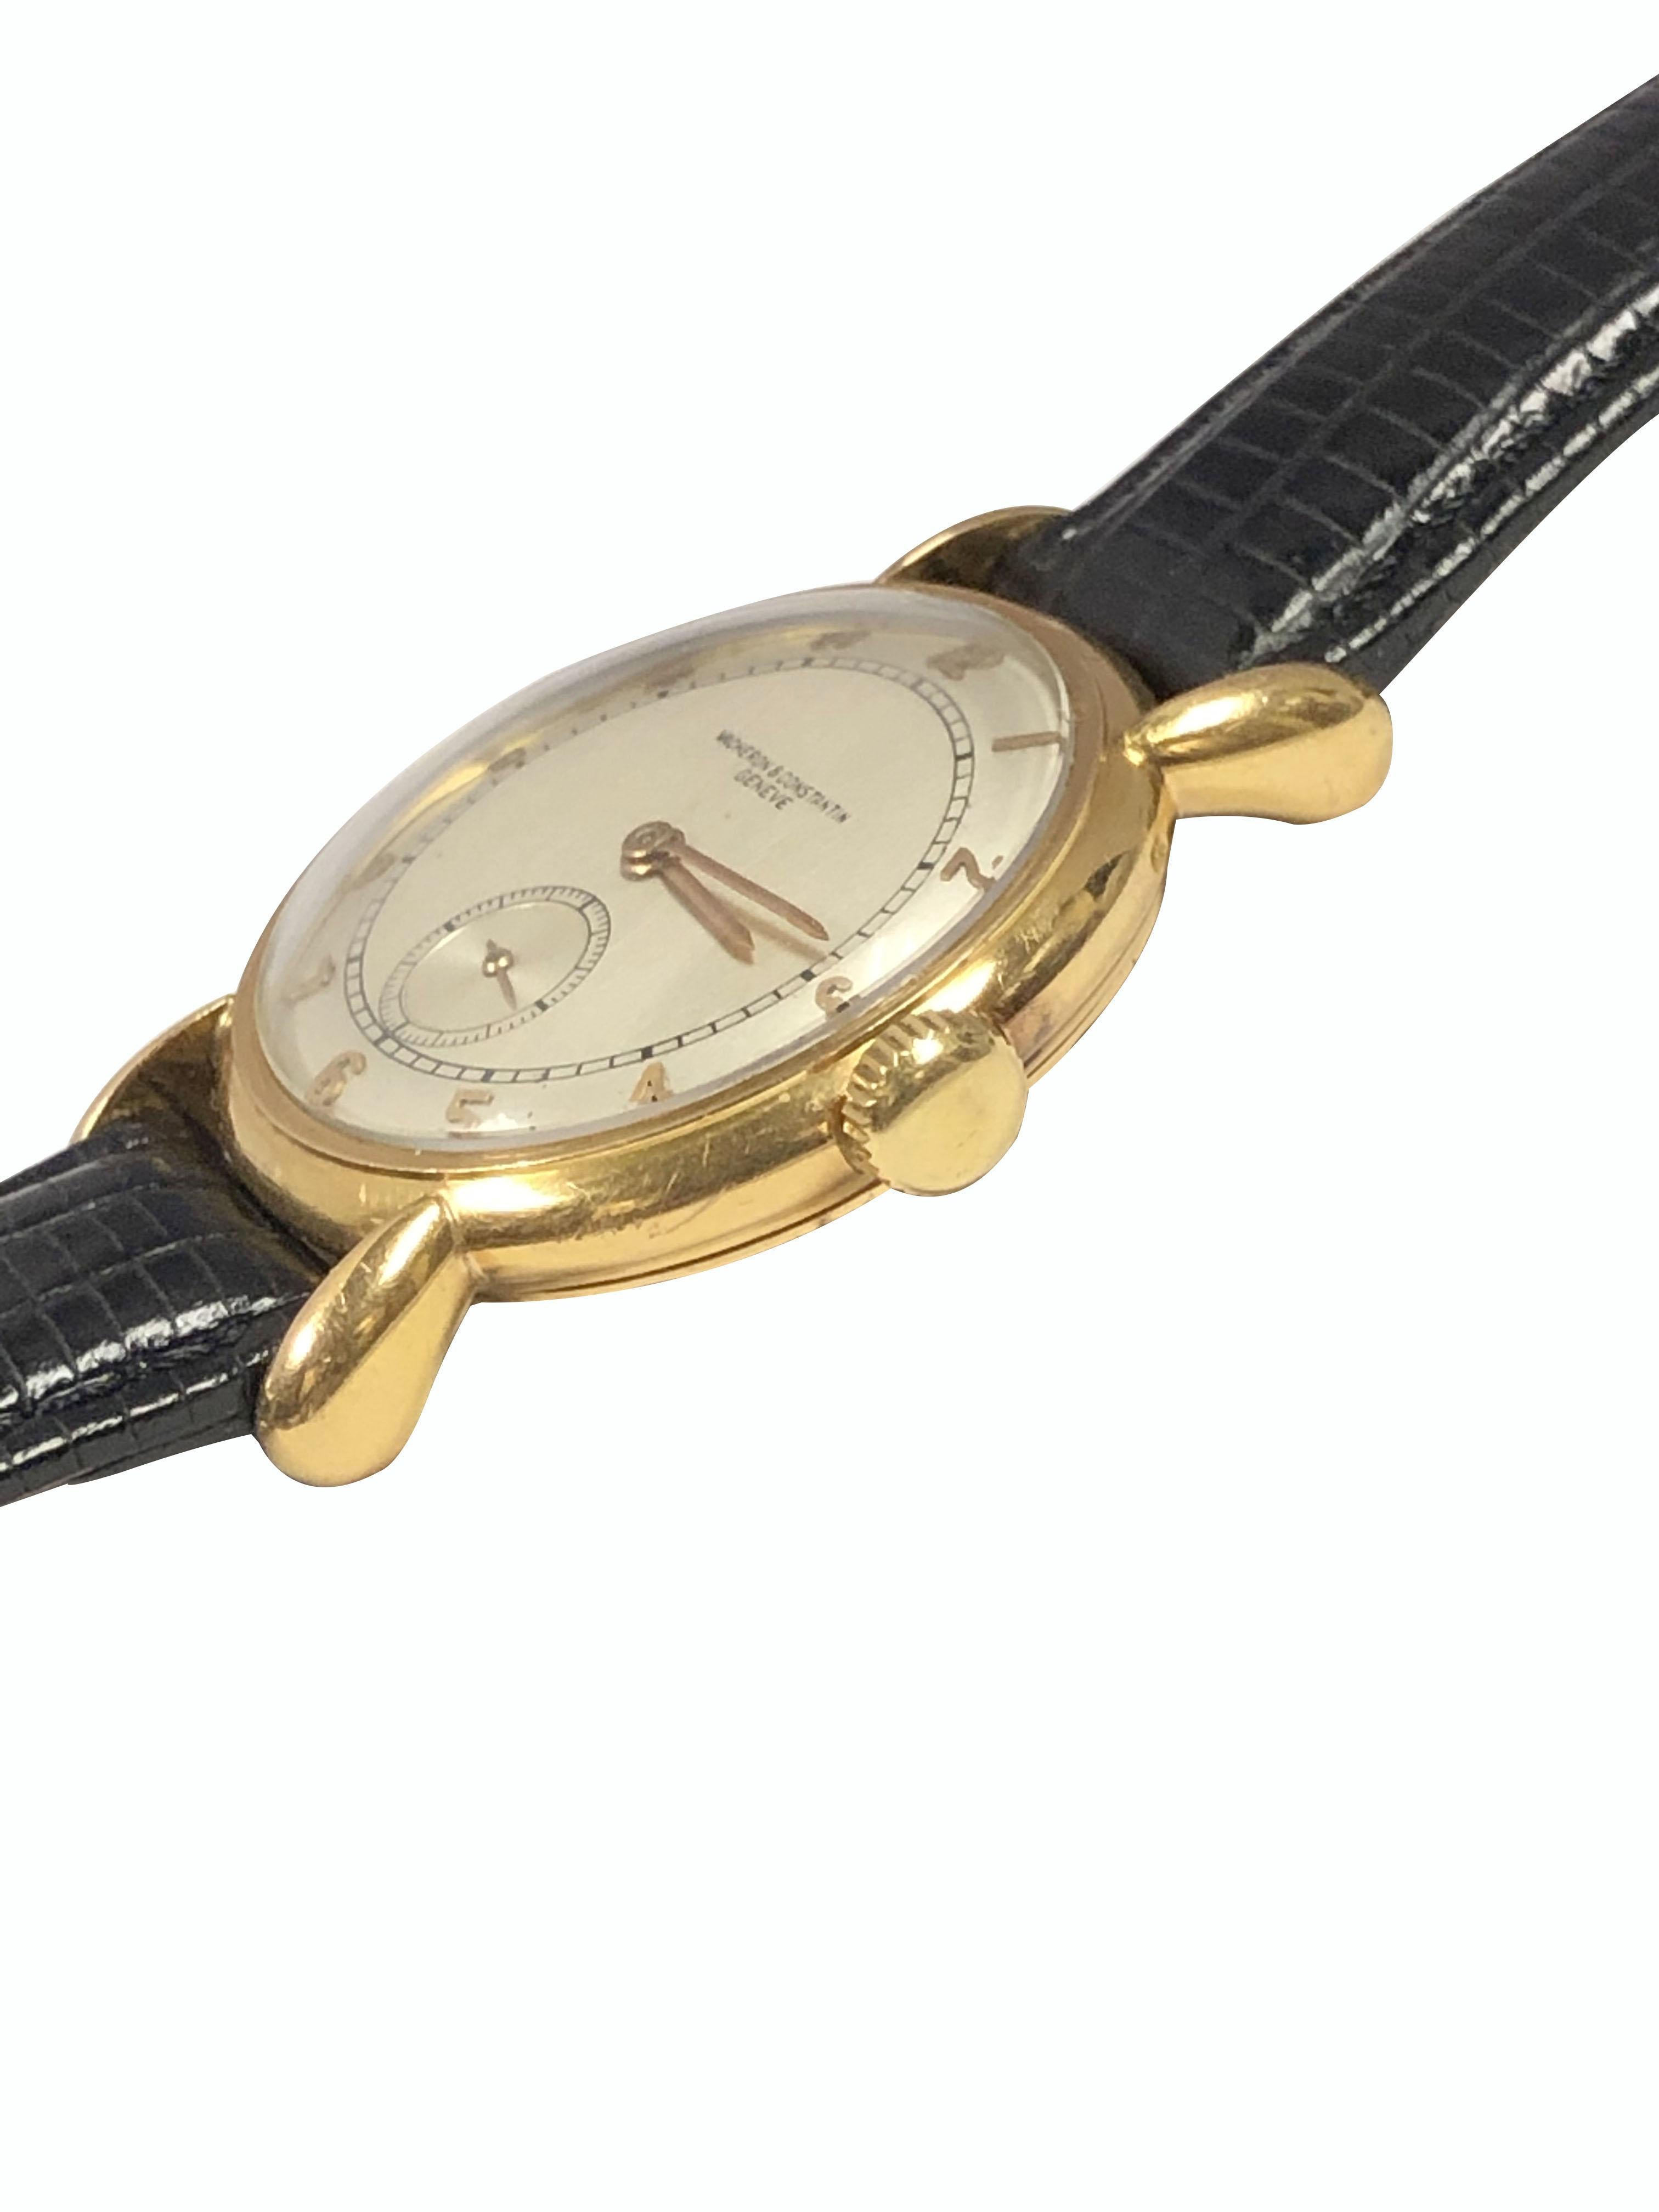 Circa late 1940s Vacheron & Constantin Wrist Watch, 32 M.M. 18K Rose Gold 2 Piece case with Water Proof back and Tear Drop lugs. 18 Jewel Mechanical, Manual wind movement. Original, Excellent Silver Satin Pie Pan Dial with raised Rose Gold Markers